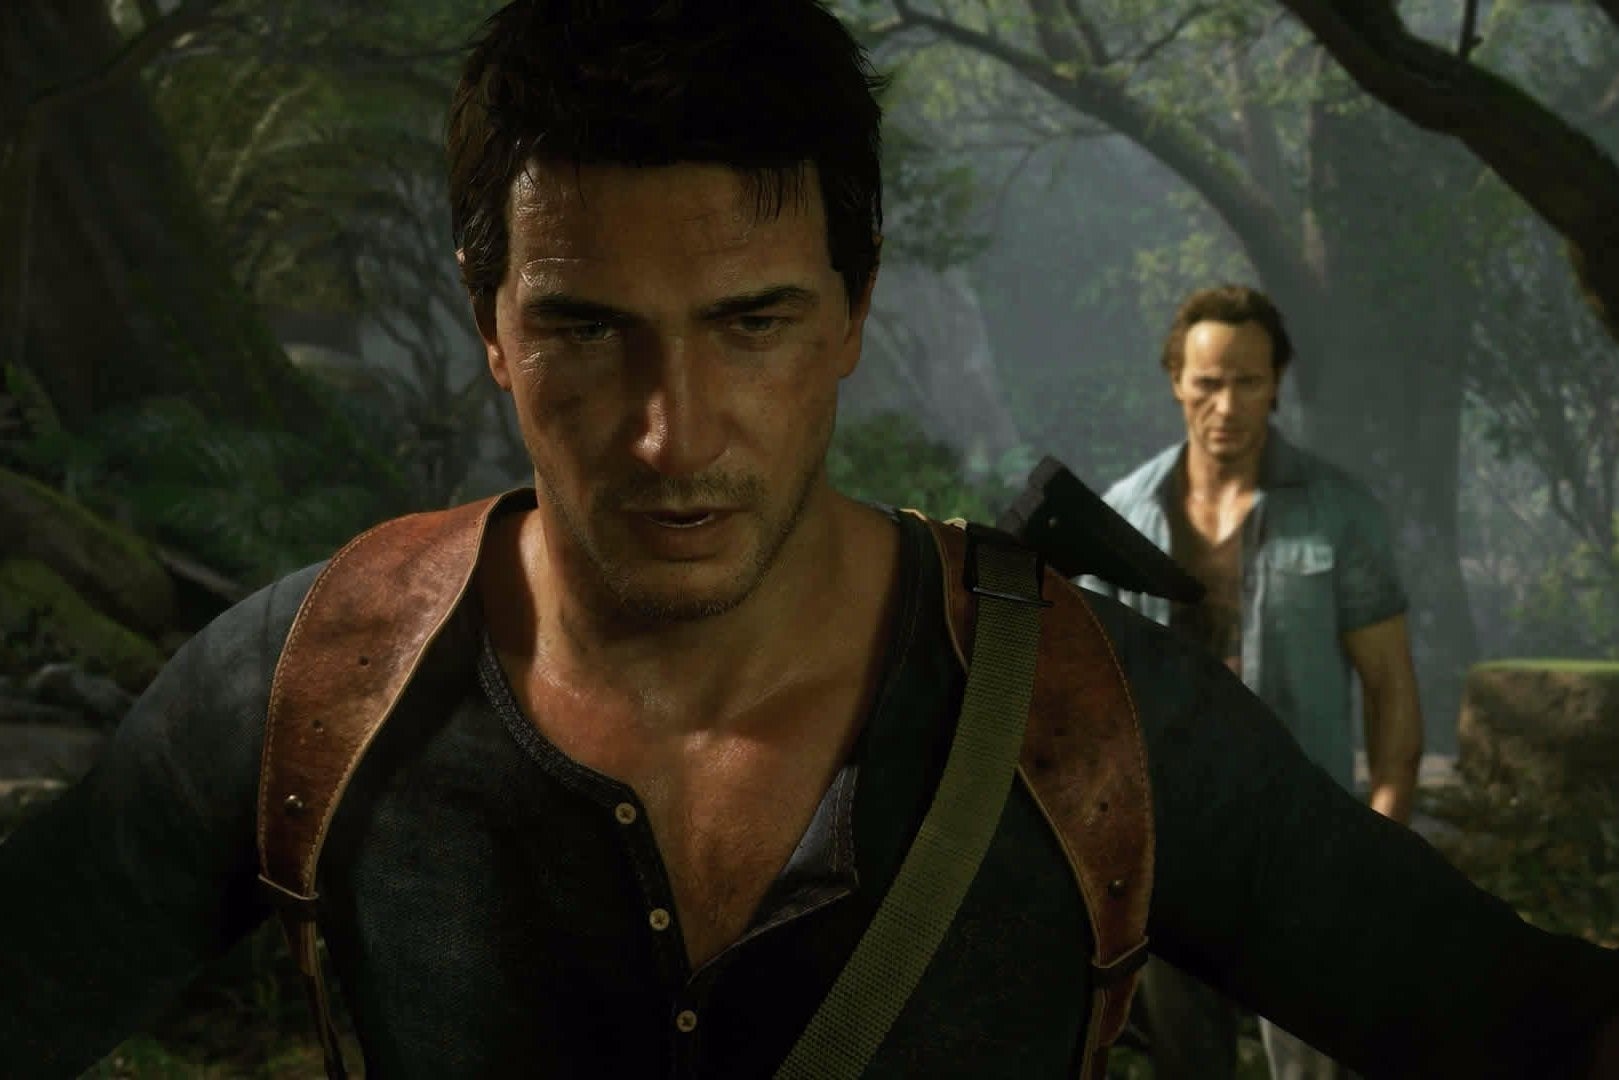 Image for Uncharted 4 beta dated for December